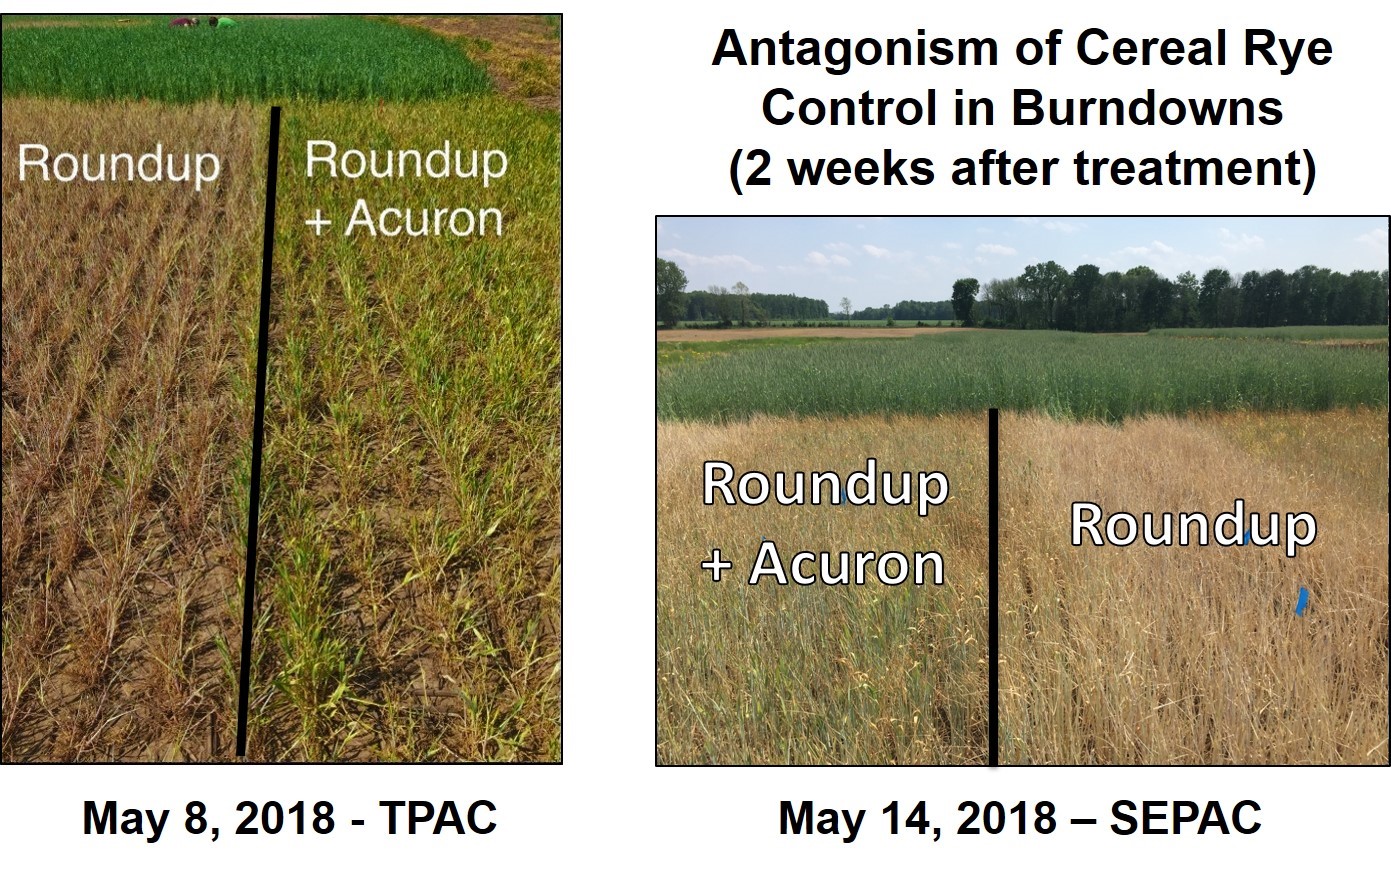 Figure 1. Picture of Roundup alone compared to Roundup + Acuron two weeks after herbicide application to terminate cereal rye.